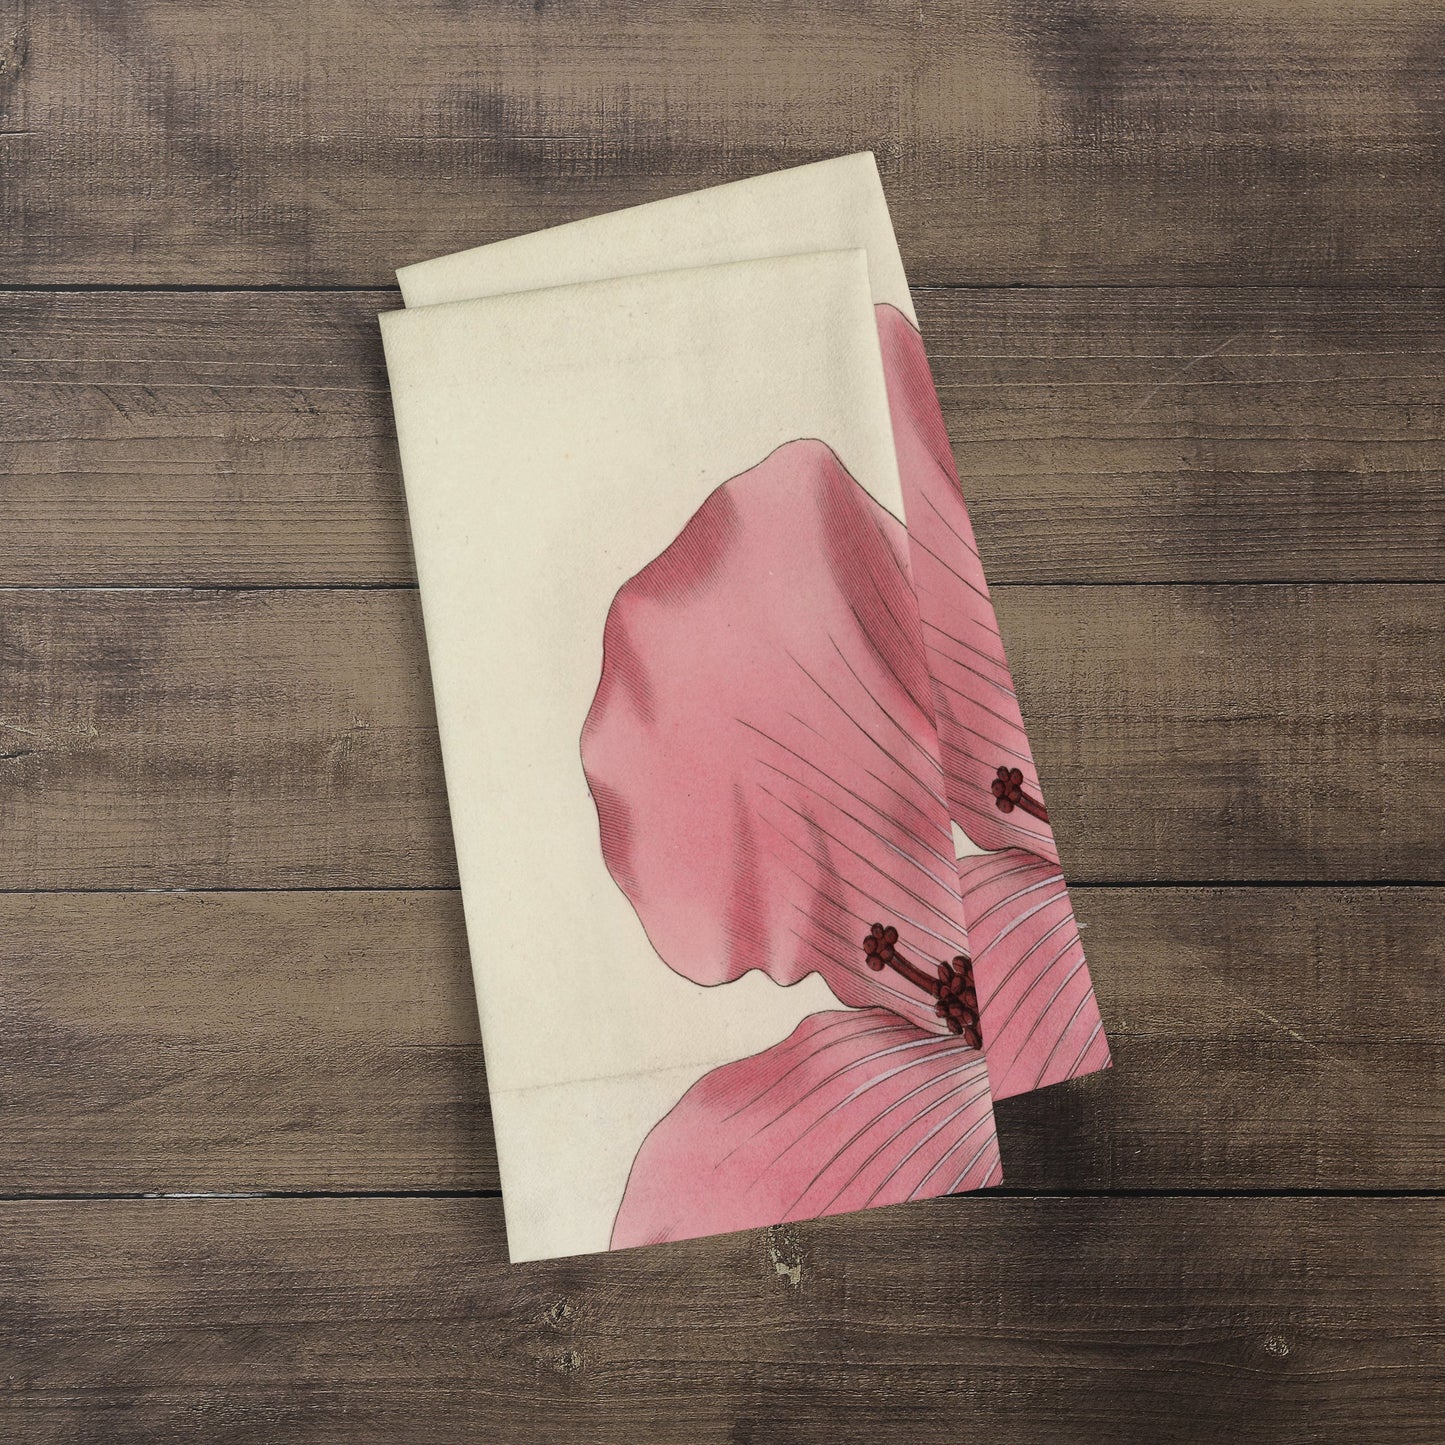 A photograph of the Hibiscus Botanical Print kitchen/tea towel folded over showing just part of the print. It is a William Curtis’s Print from 1790-1800